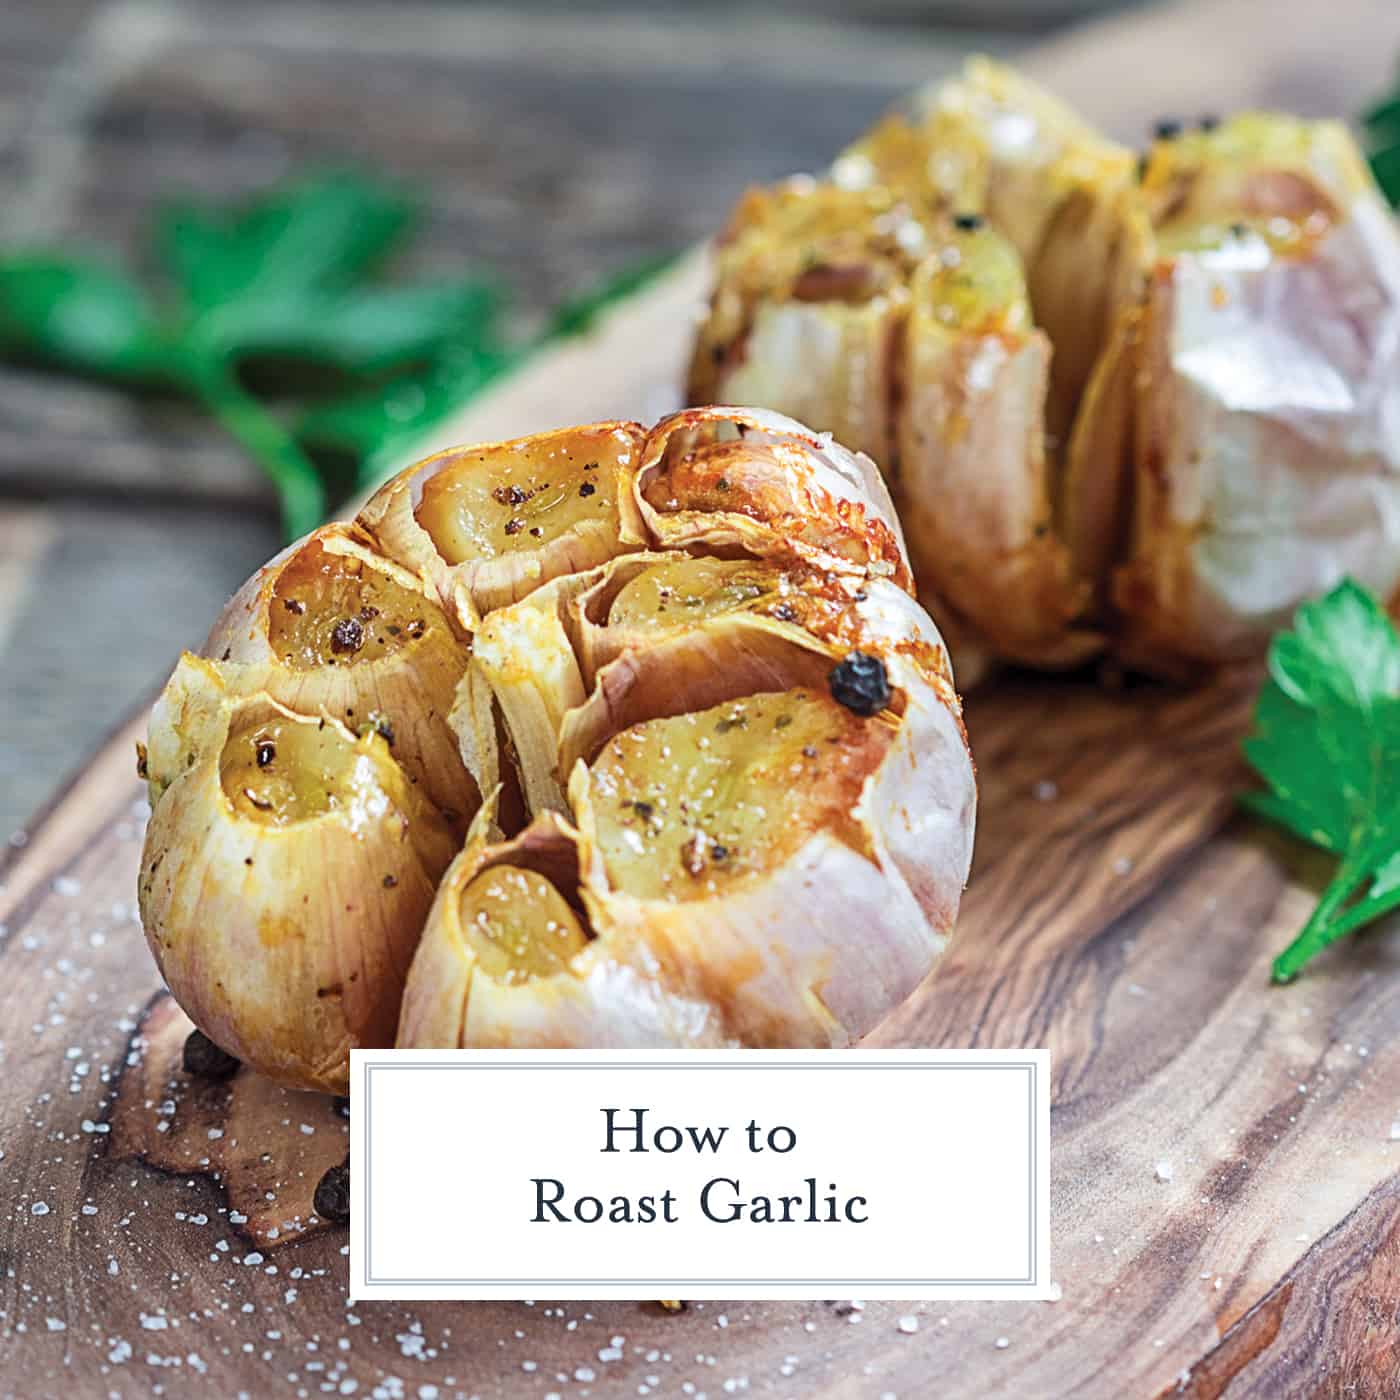 Simple, easy-to-follow steps on how to roast garlic. Roasted Garlic adds a muted, buttery, browned garlicky flavor to any dish that calls for garlic. If can also be served alone on bread or a charcuterie platter. #roastedgarlic #howtoroastgarlic www.savoryexperiments.com